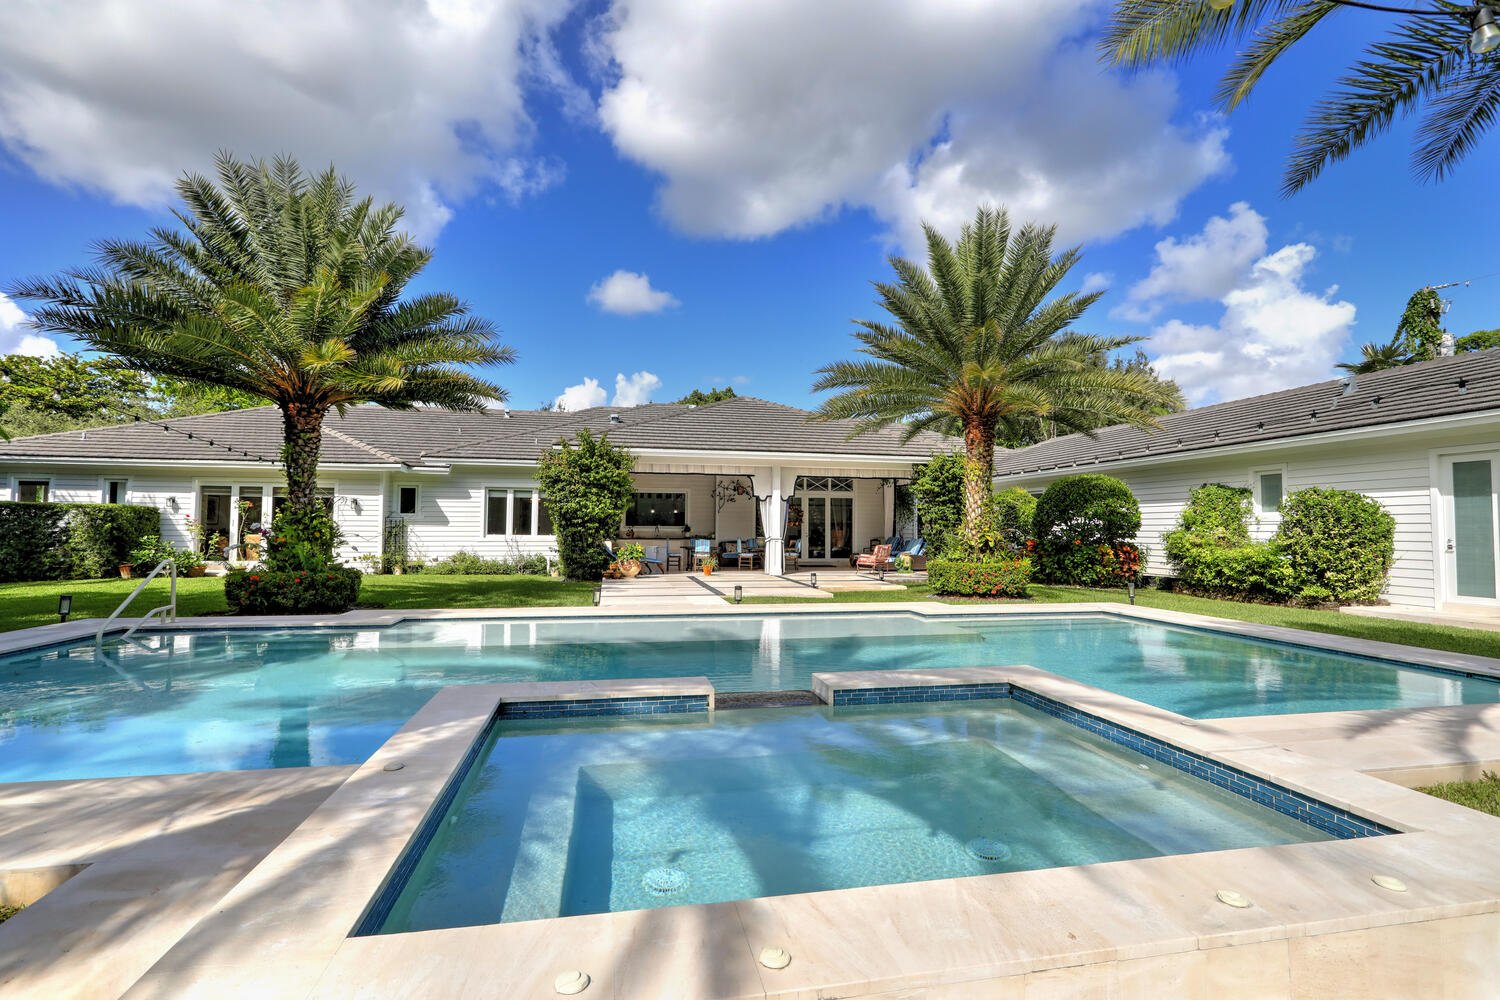 Master Brokers Forum Listing: Check Out This 'Hamptons Meets Key West' Style North Pinecrest Home Asking $5.8 Million 15.jpg